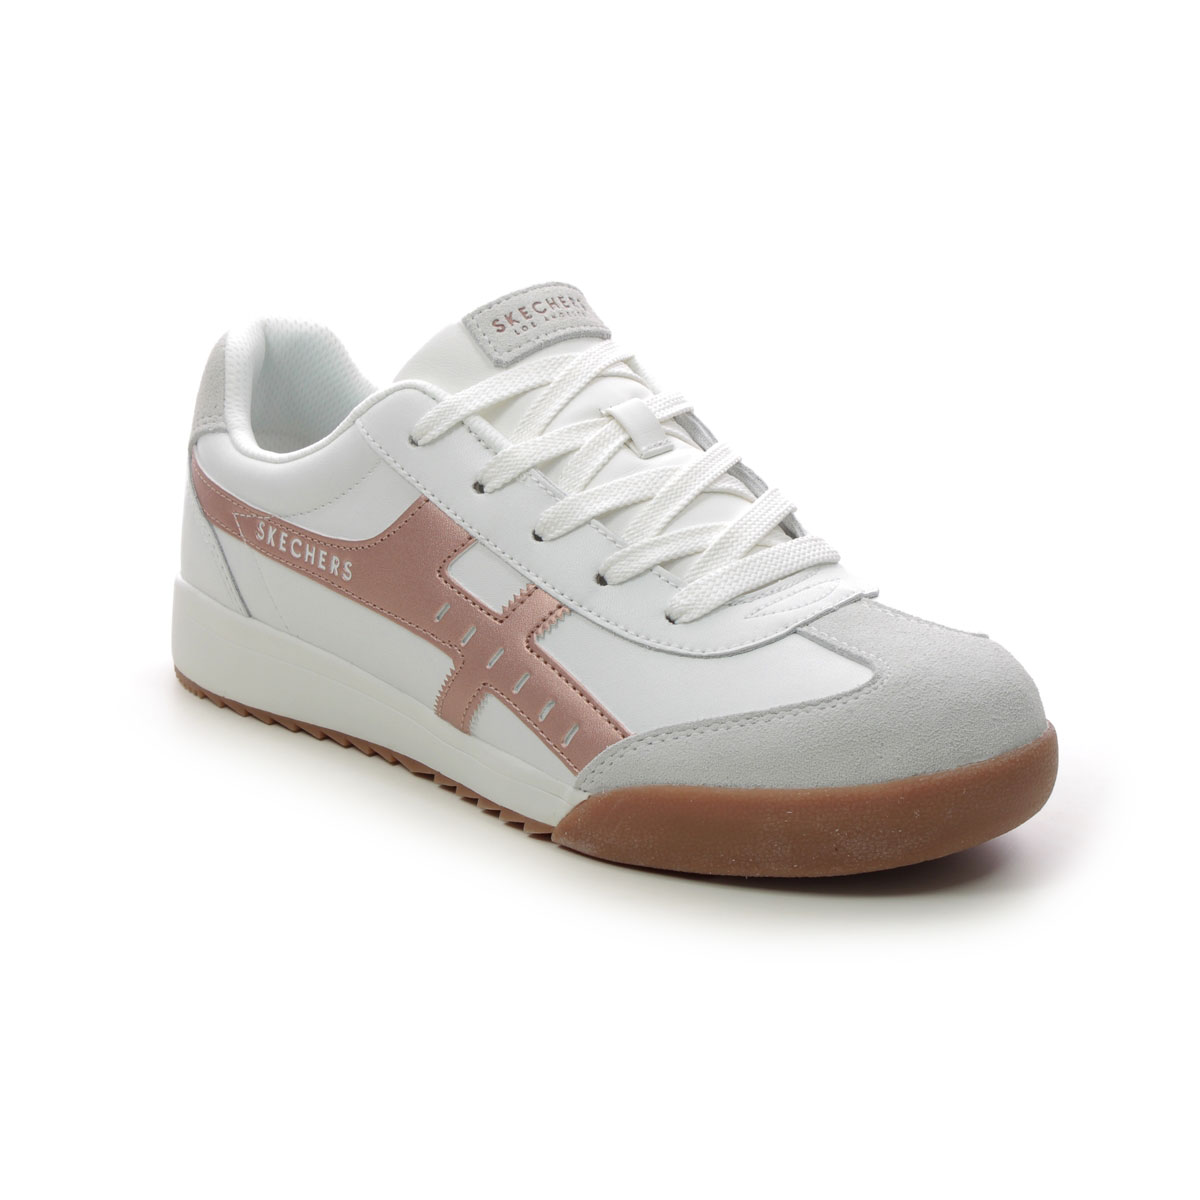 Skechers Zinger Ladies WTRG White Rose gold Womens trainers 177500 in a Plain Leather and Man-made in Size 4